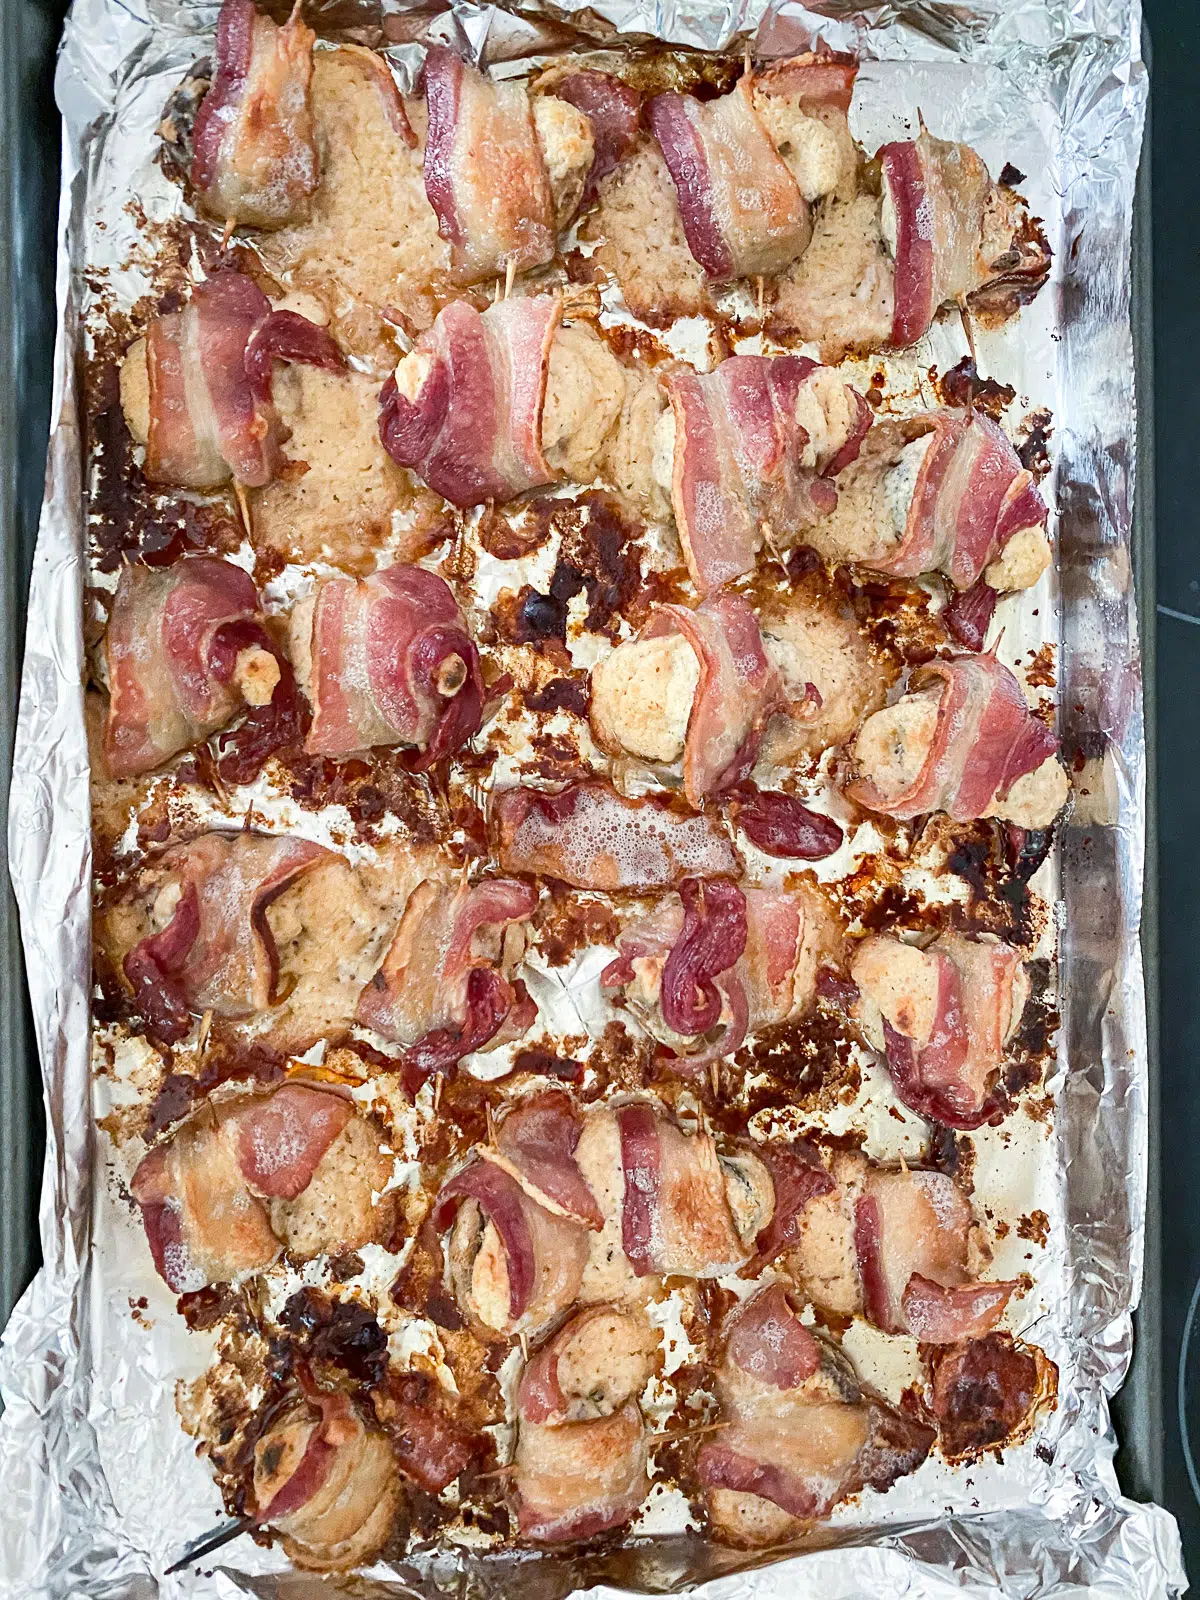 Foil pan with cooked bacon wrapped mushrooms on it